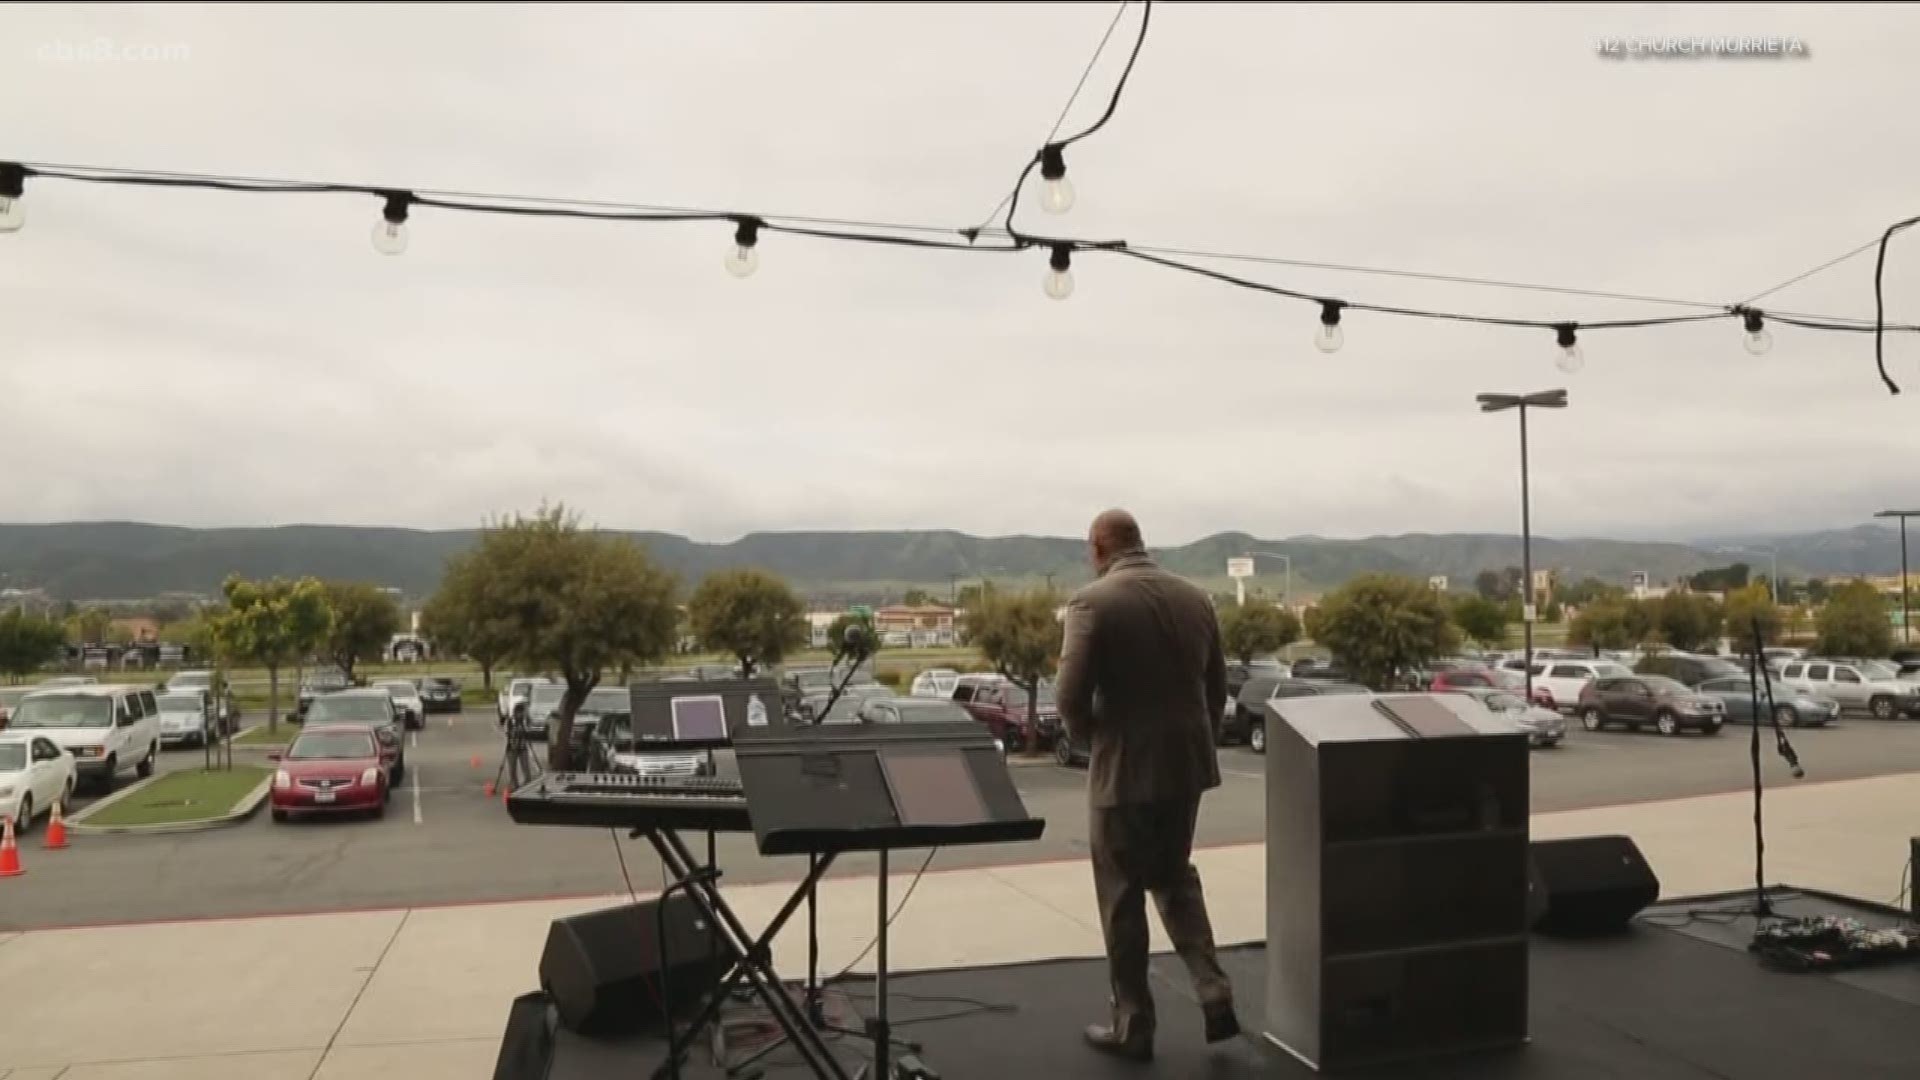 Churches around San Diego held virtual services to reach those who were asked to stay home. Meanwhile, one church in Murrieta fought to have a drive-in service.